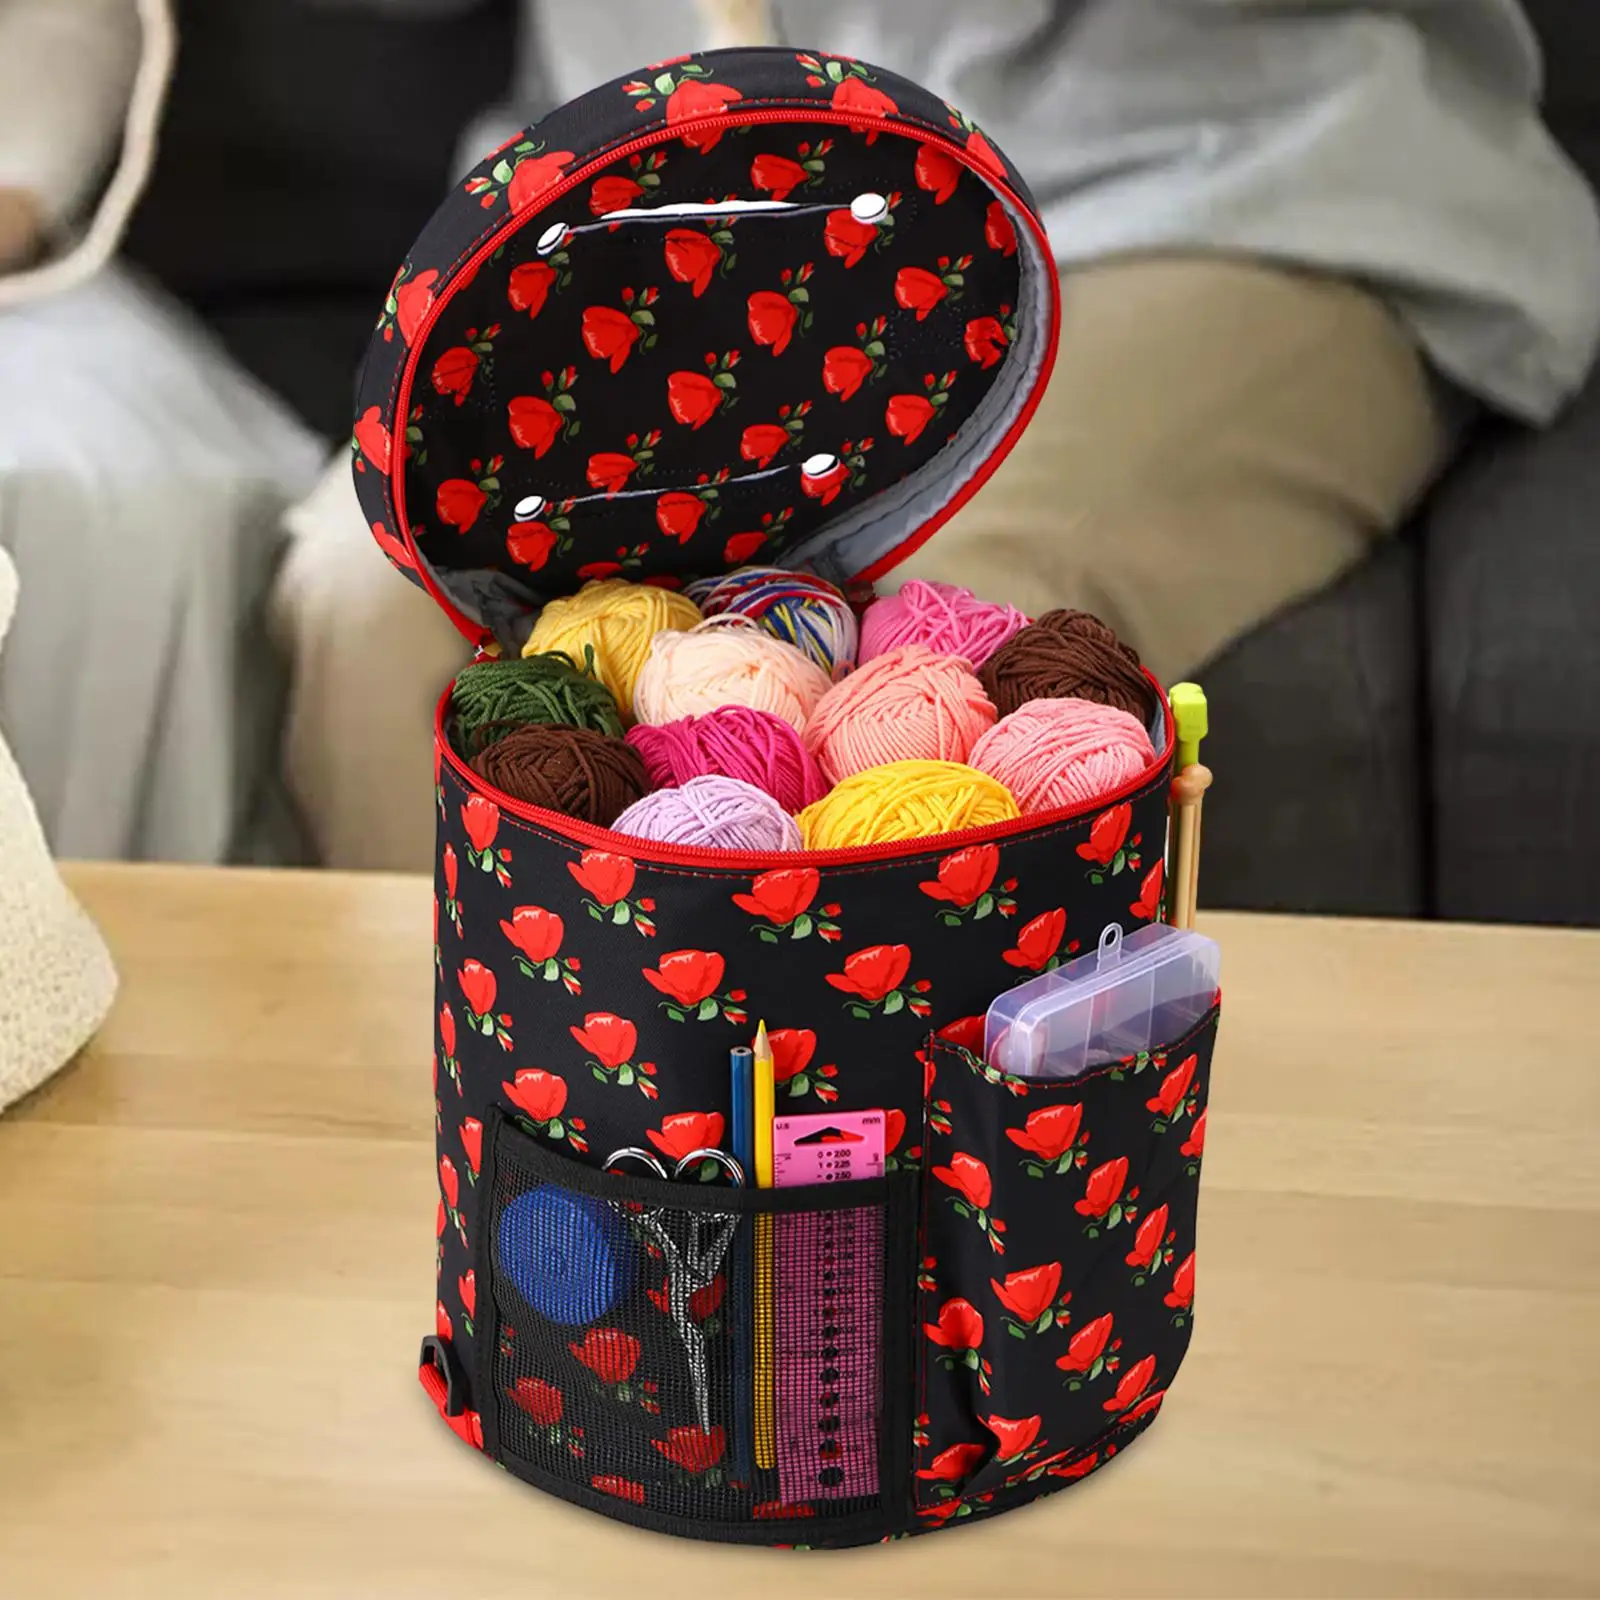 Yarn Storage Case with Shoulder Strap Fits A Ball of Yarn Knitting Bag Travel Large Crochet Bag for Knitting Needles Accessories